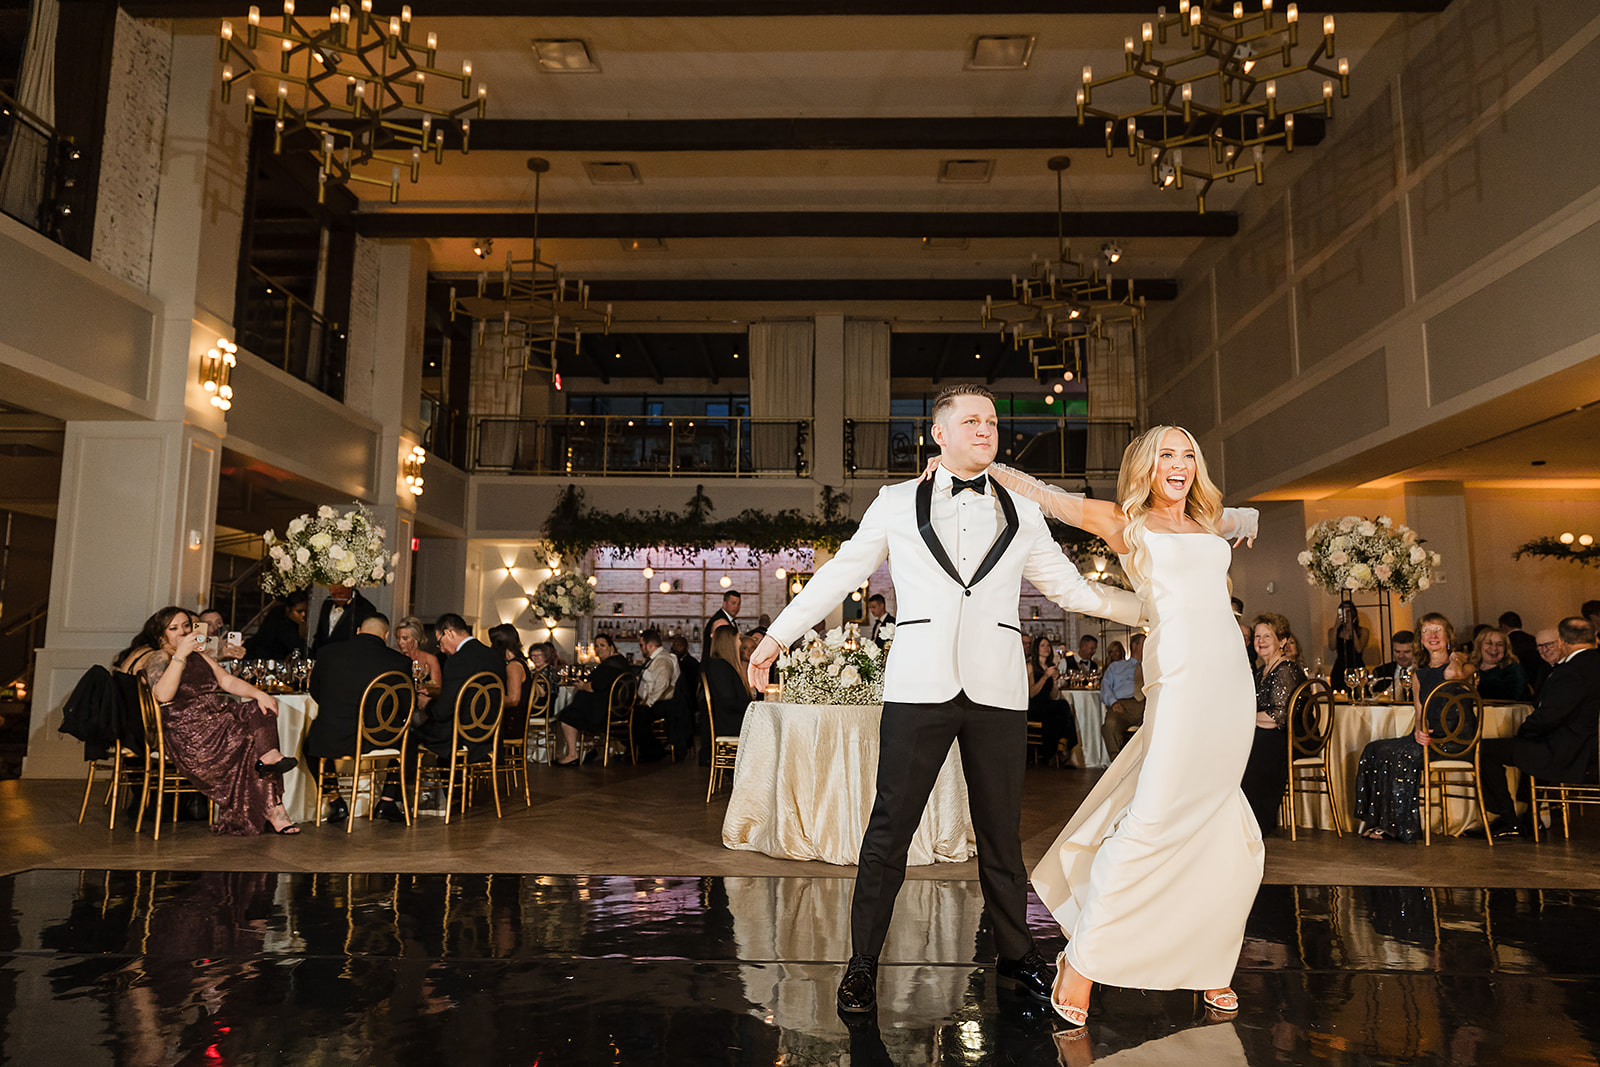 Couple's first wedding dance at The Lucy by Cescaphe in Philadelphia